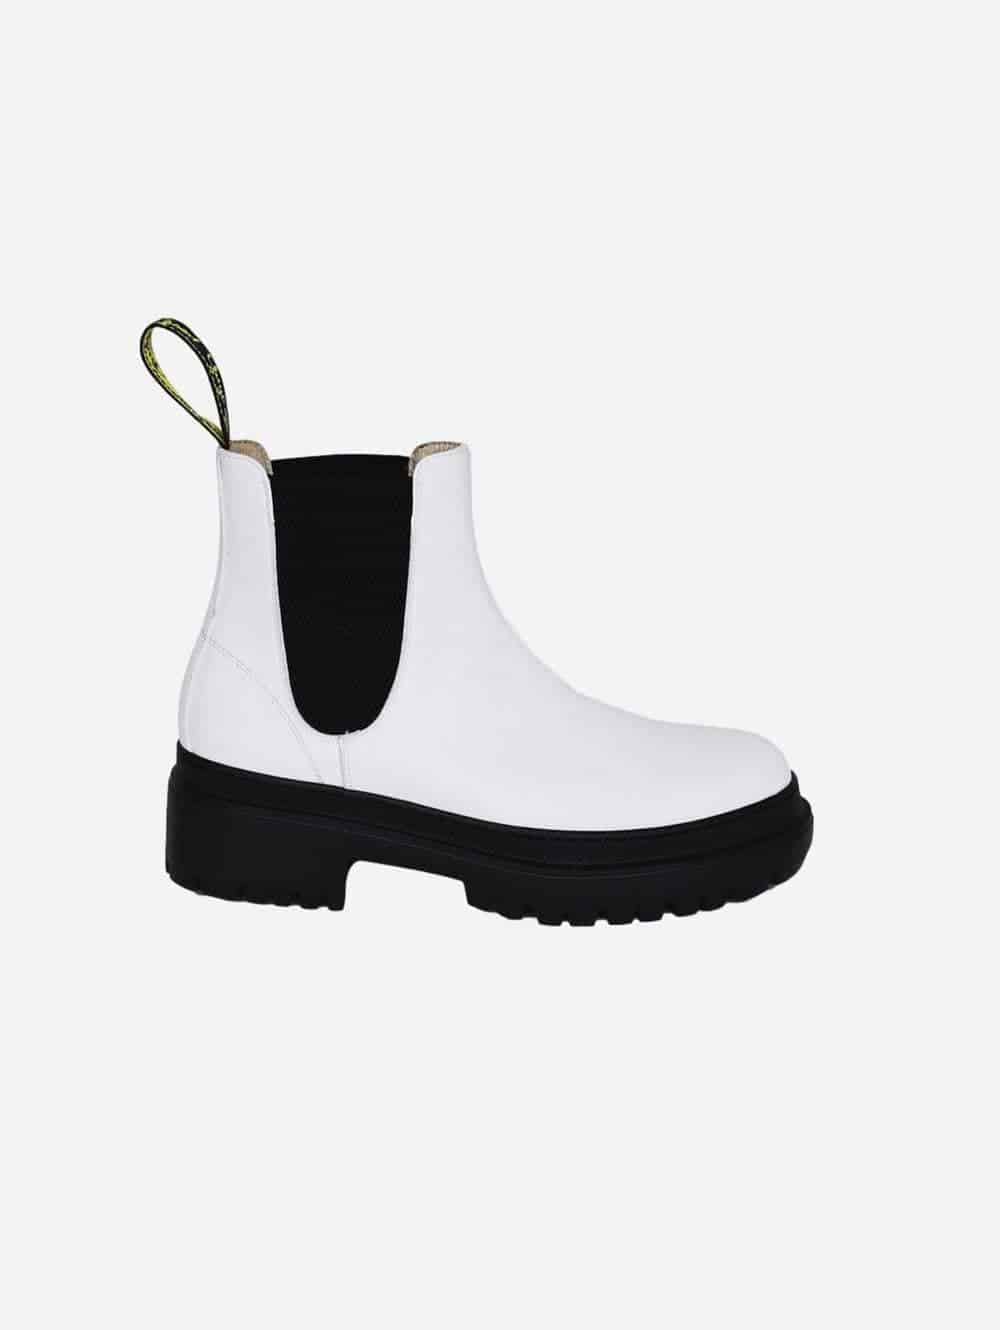 Chelsea boot vegan from good guys don't wear leather